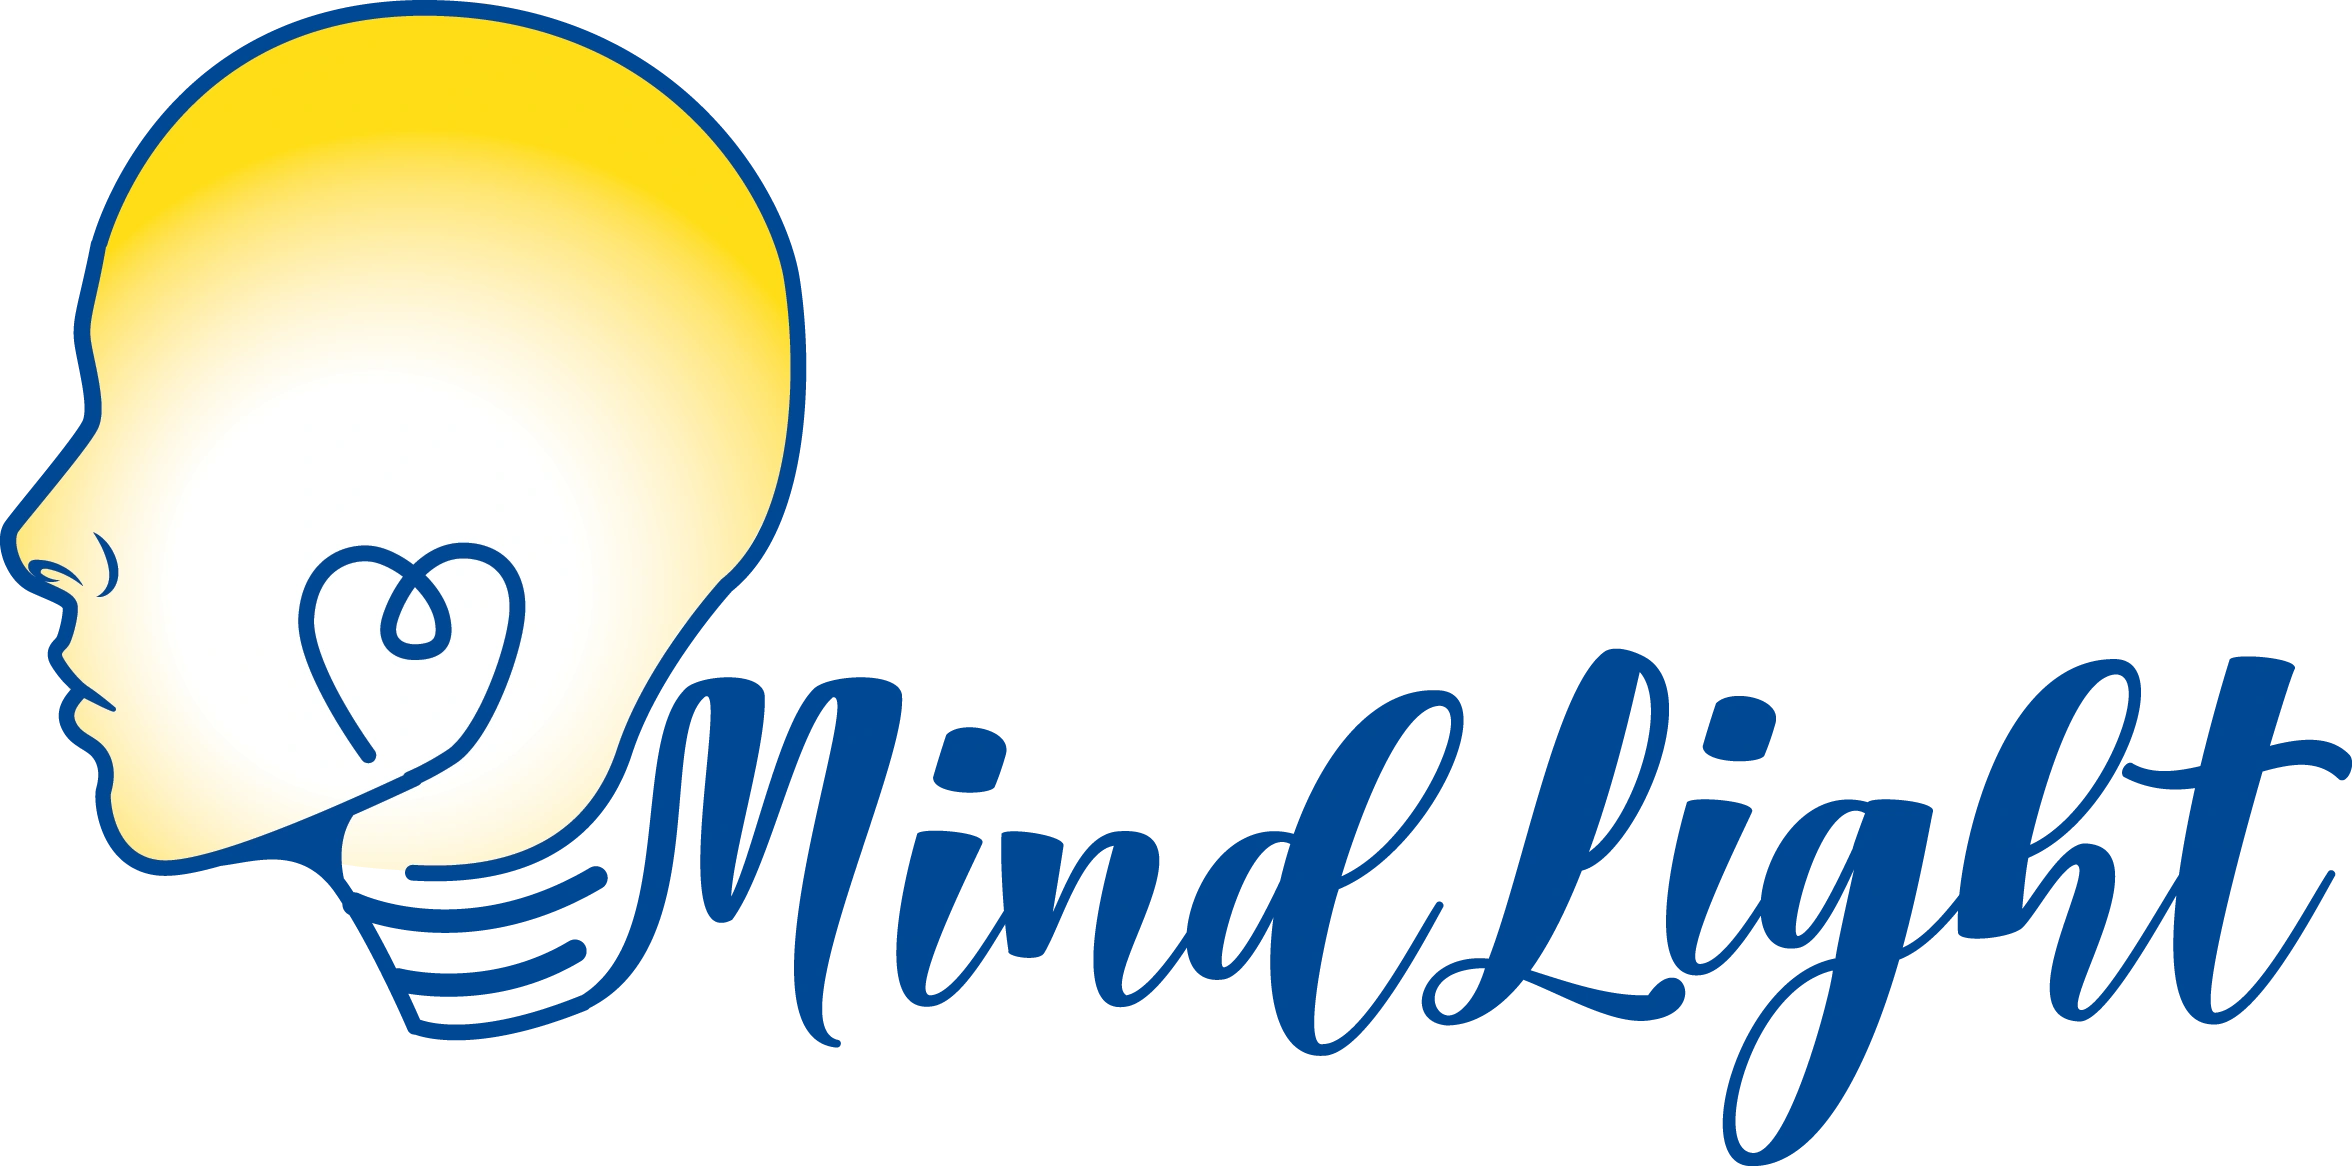 MindLight provides psychiatric services for Children, Adolescents and Pregnant and postpartum people